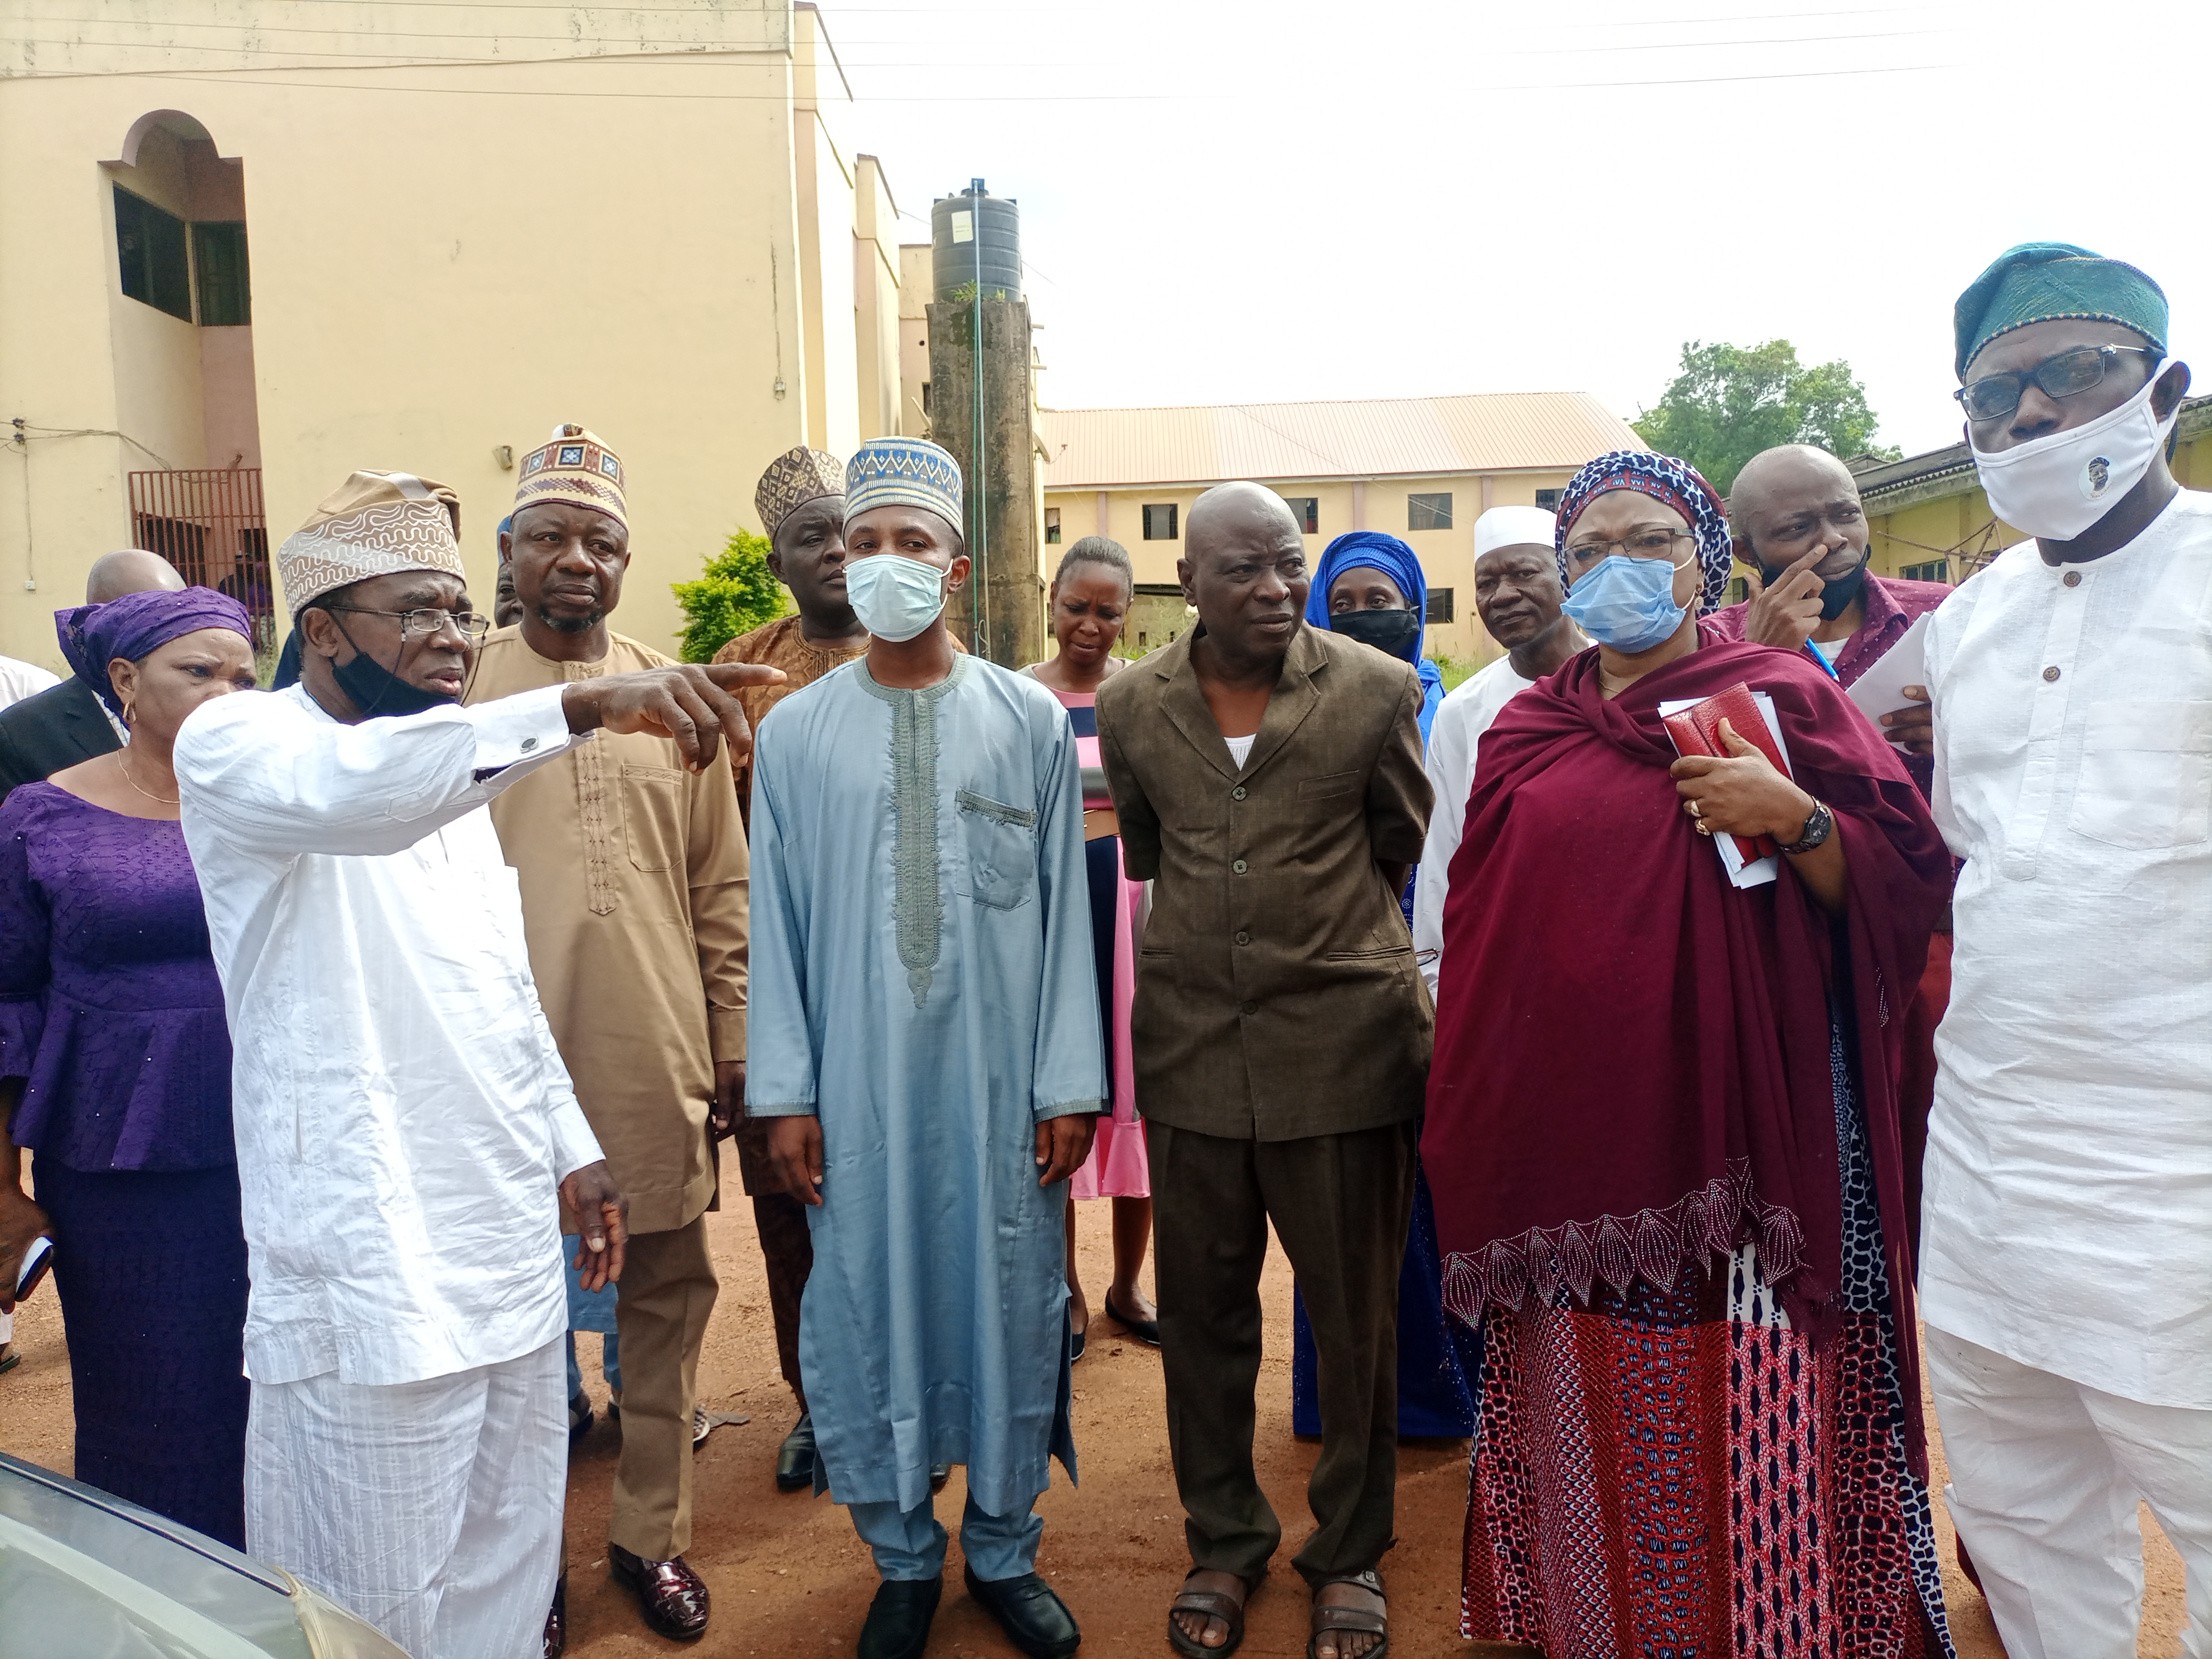 AN OFFICIAL VISIT OF THE HONOURABLE COMMISSIONER FOR TERTIARY EDUCATION, SCIENCE AND TECHNOLOGY AND HIS ENTOURAGE TO KWCOED, ILORIN